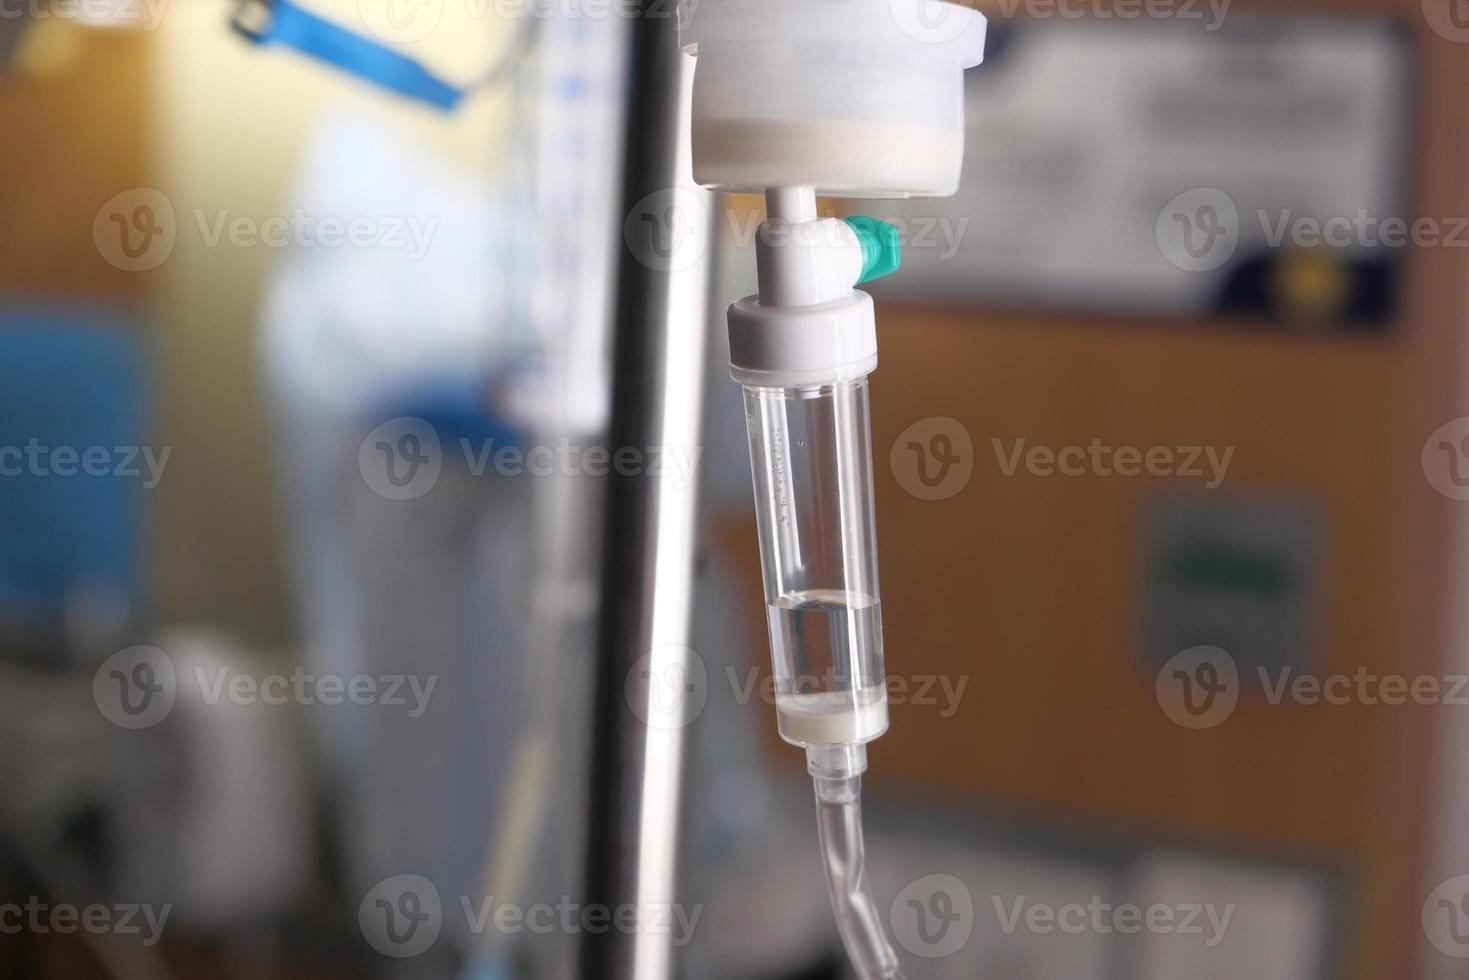 Saline solution dripping in hospital room photo